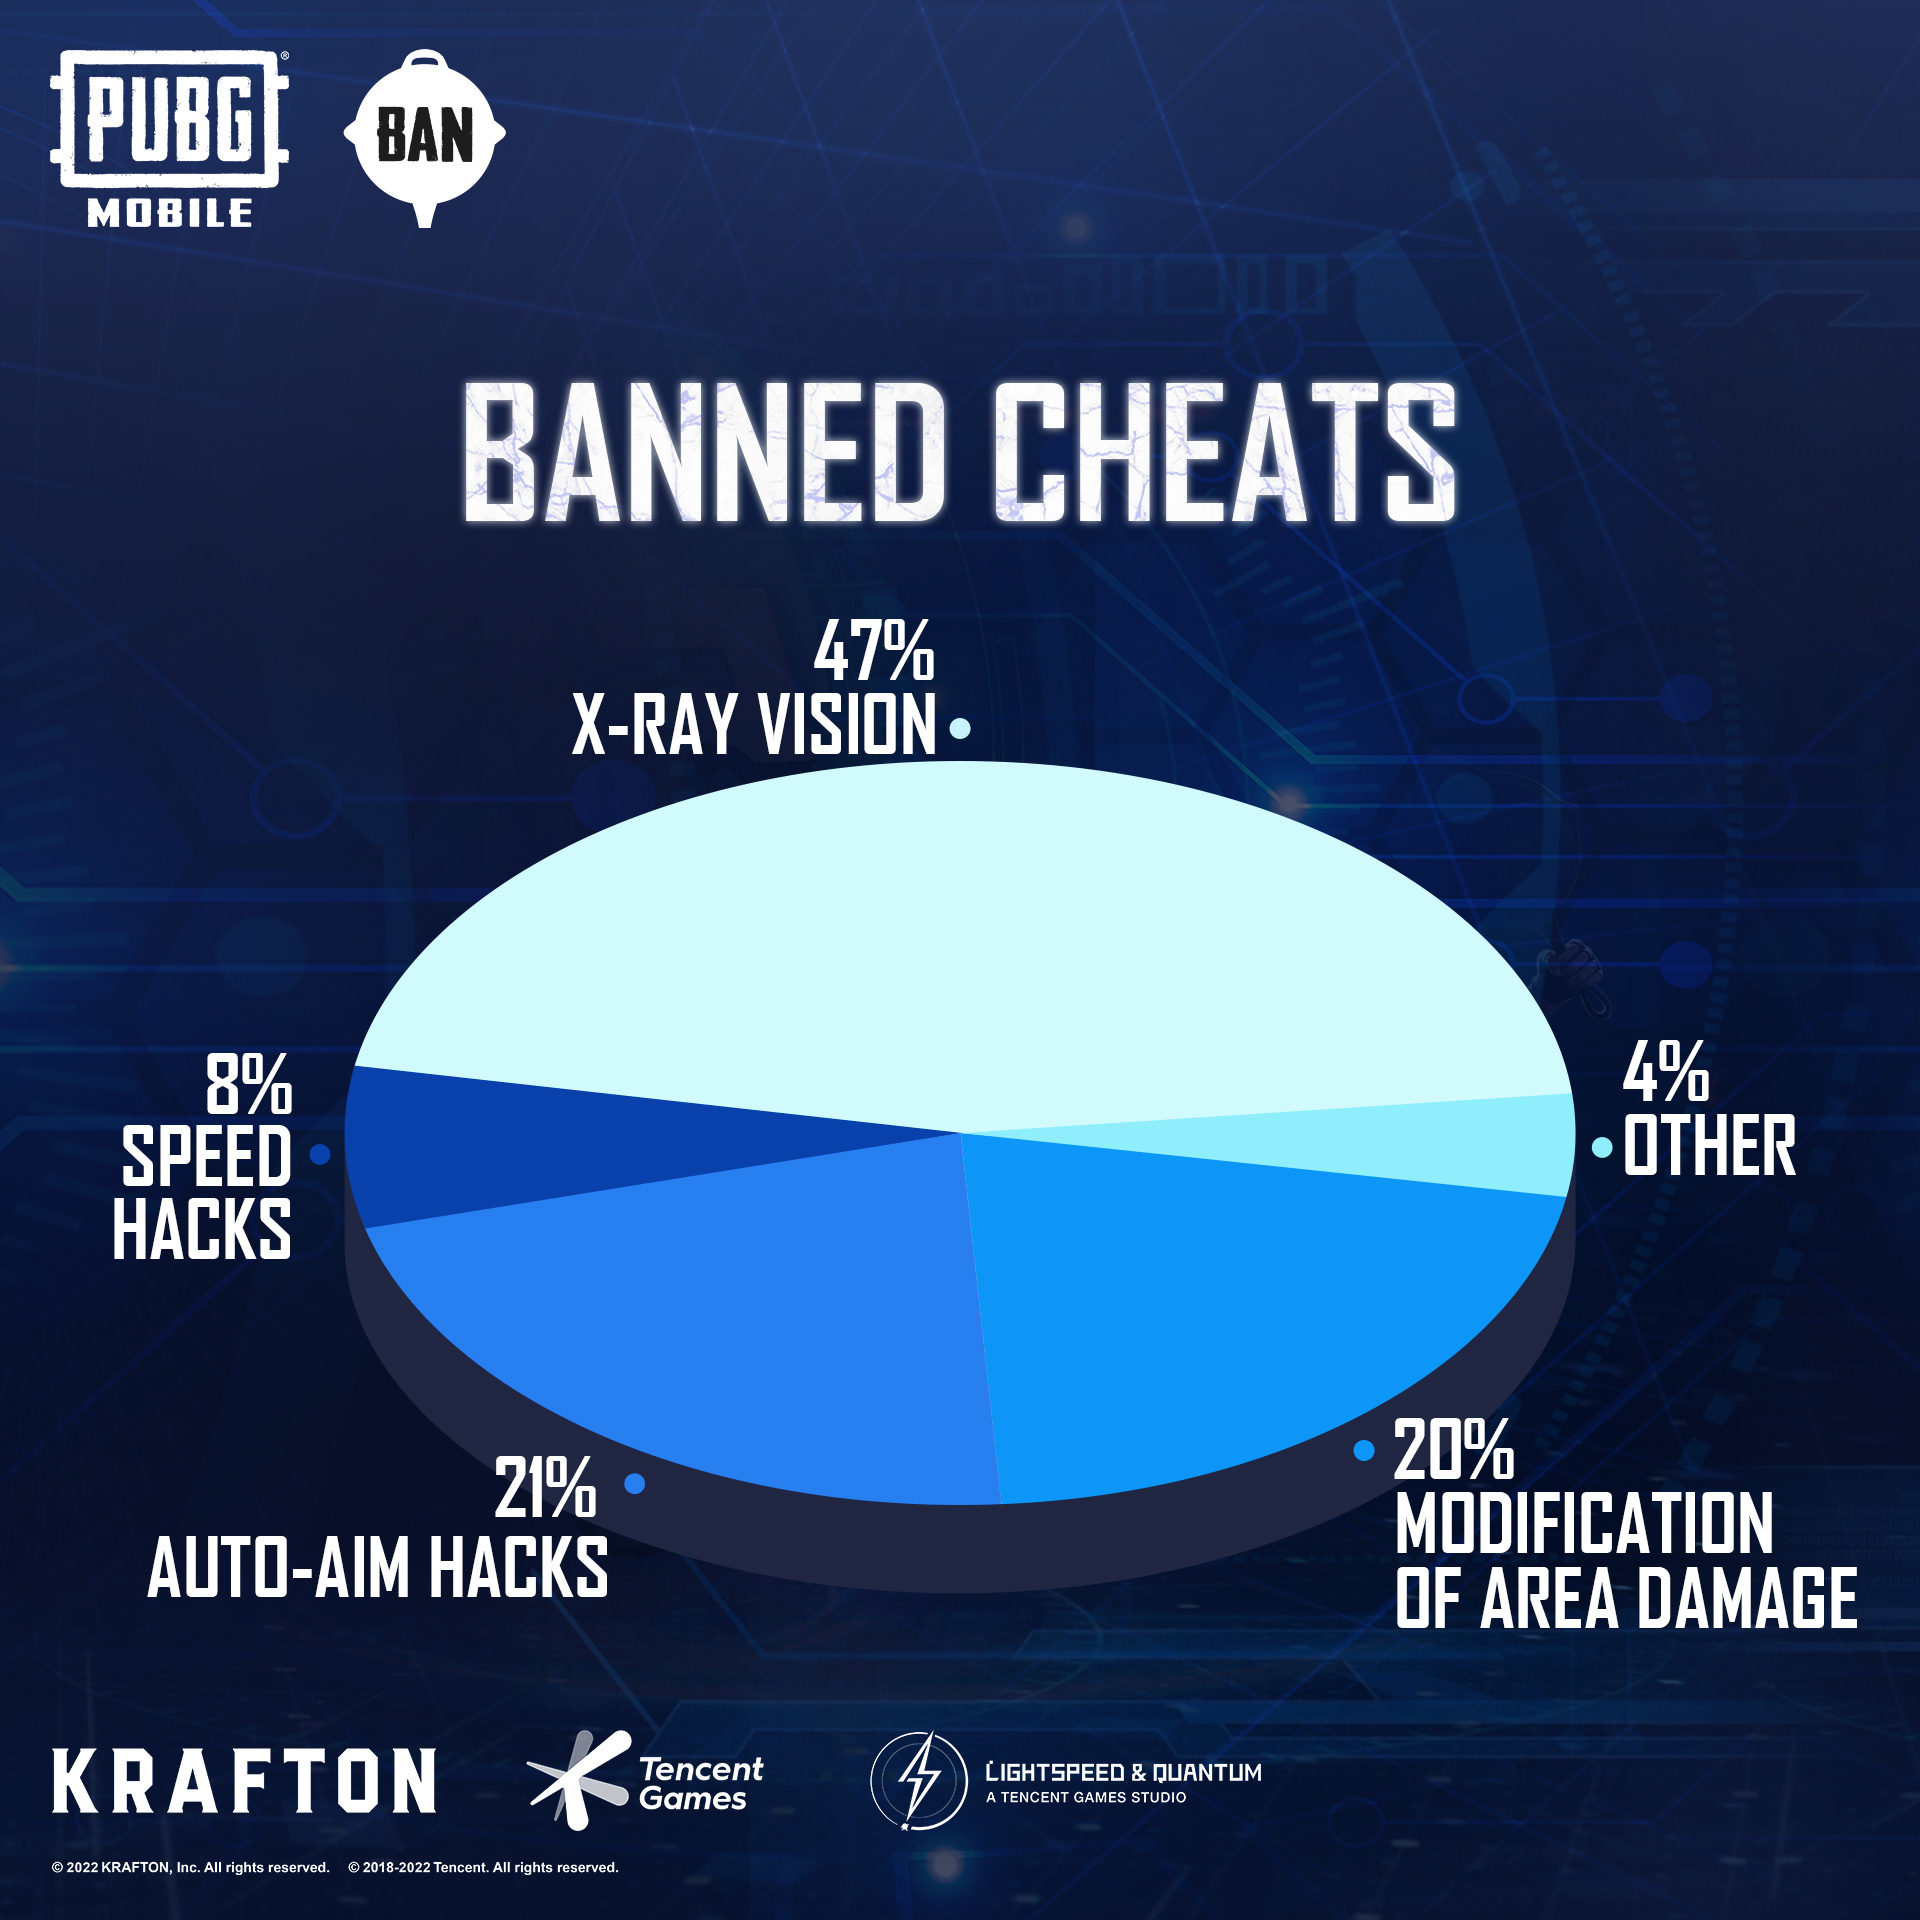 PUBG Mobile Ban Pan 2.0: Tencent permanently suspended 464912 accounts and 4465 devices for cheating in PUBG Mobile